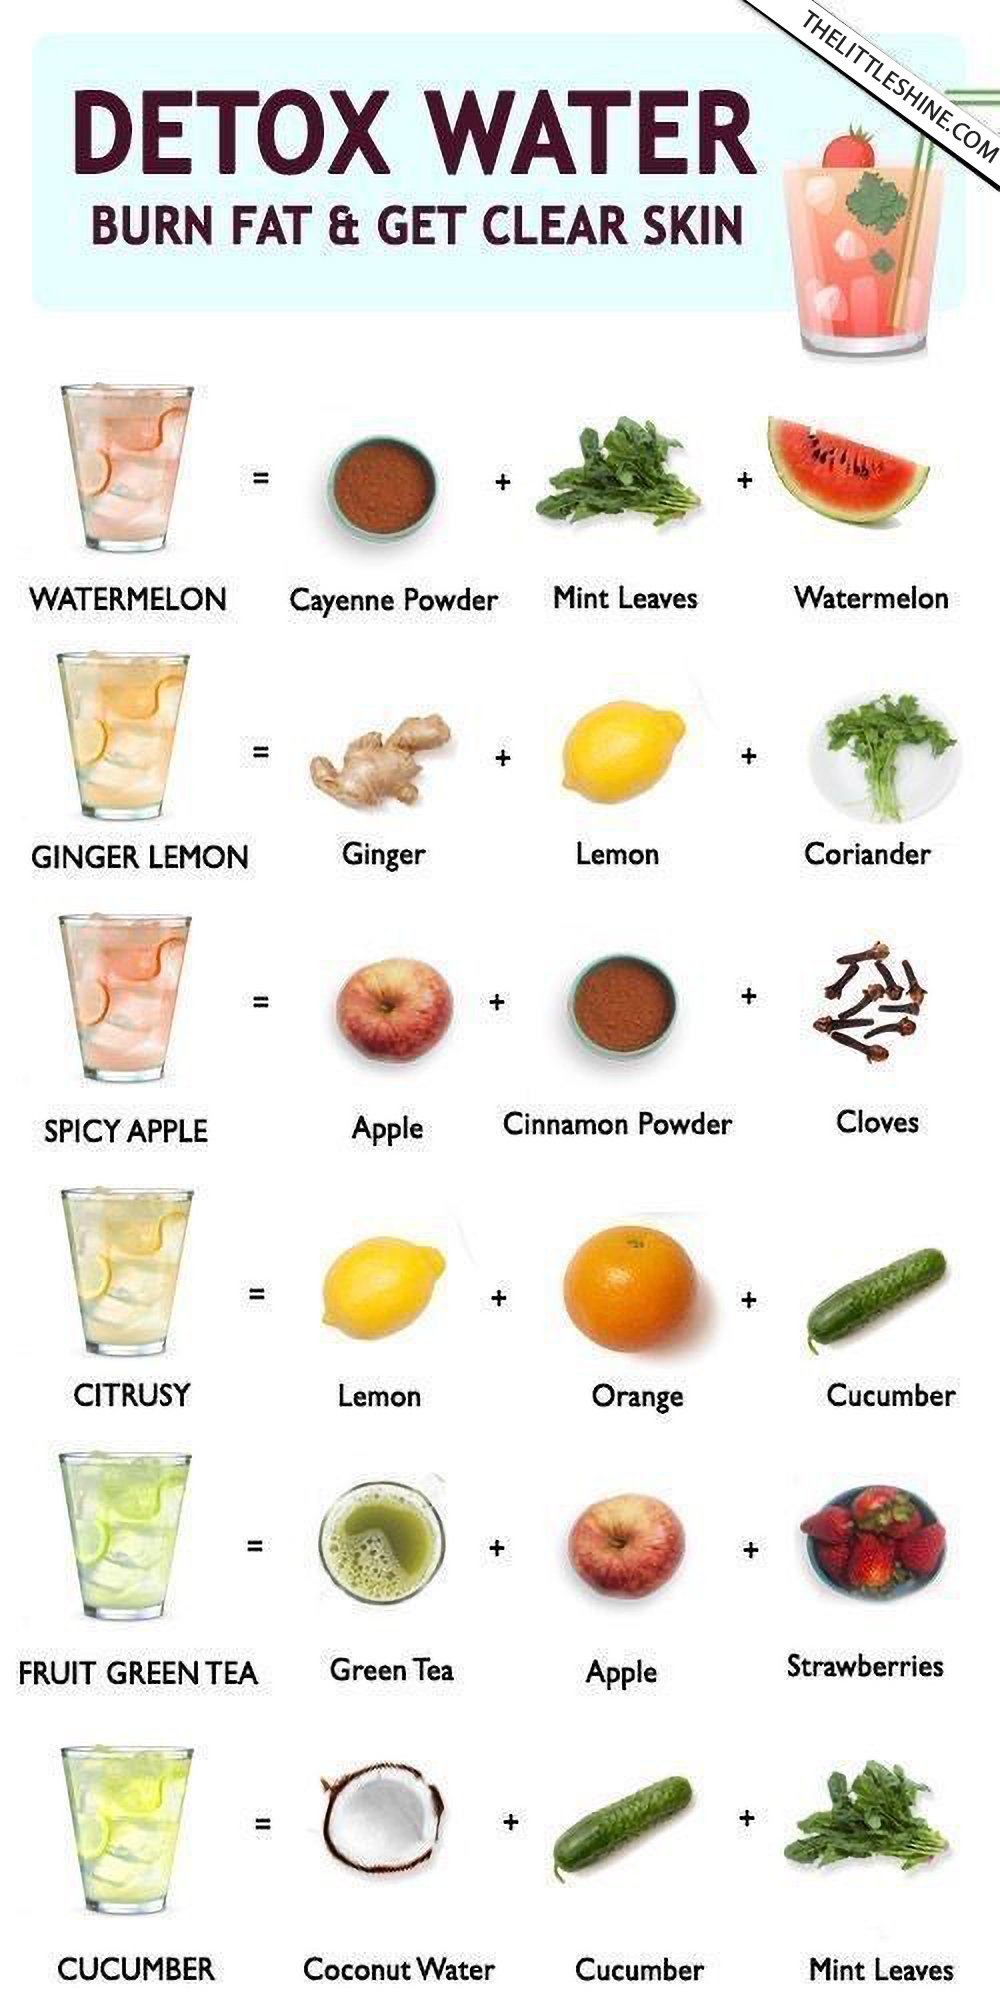 SIX DETOX WATER RECIPES FOR CLEAR SKIN and BURN FAT